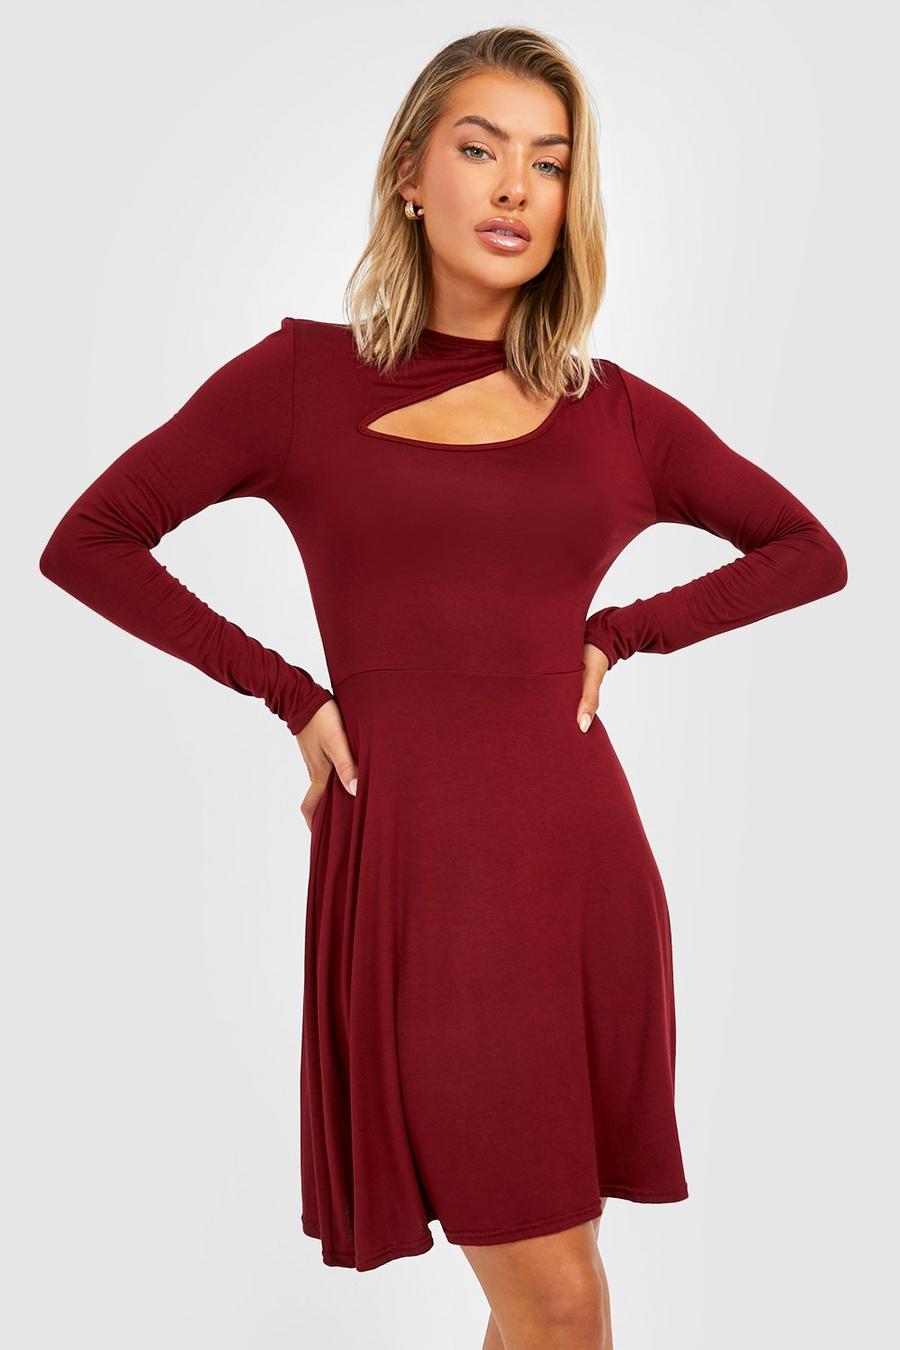 Berry red Cut Out Long Sleeve Skater Dress